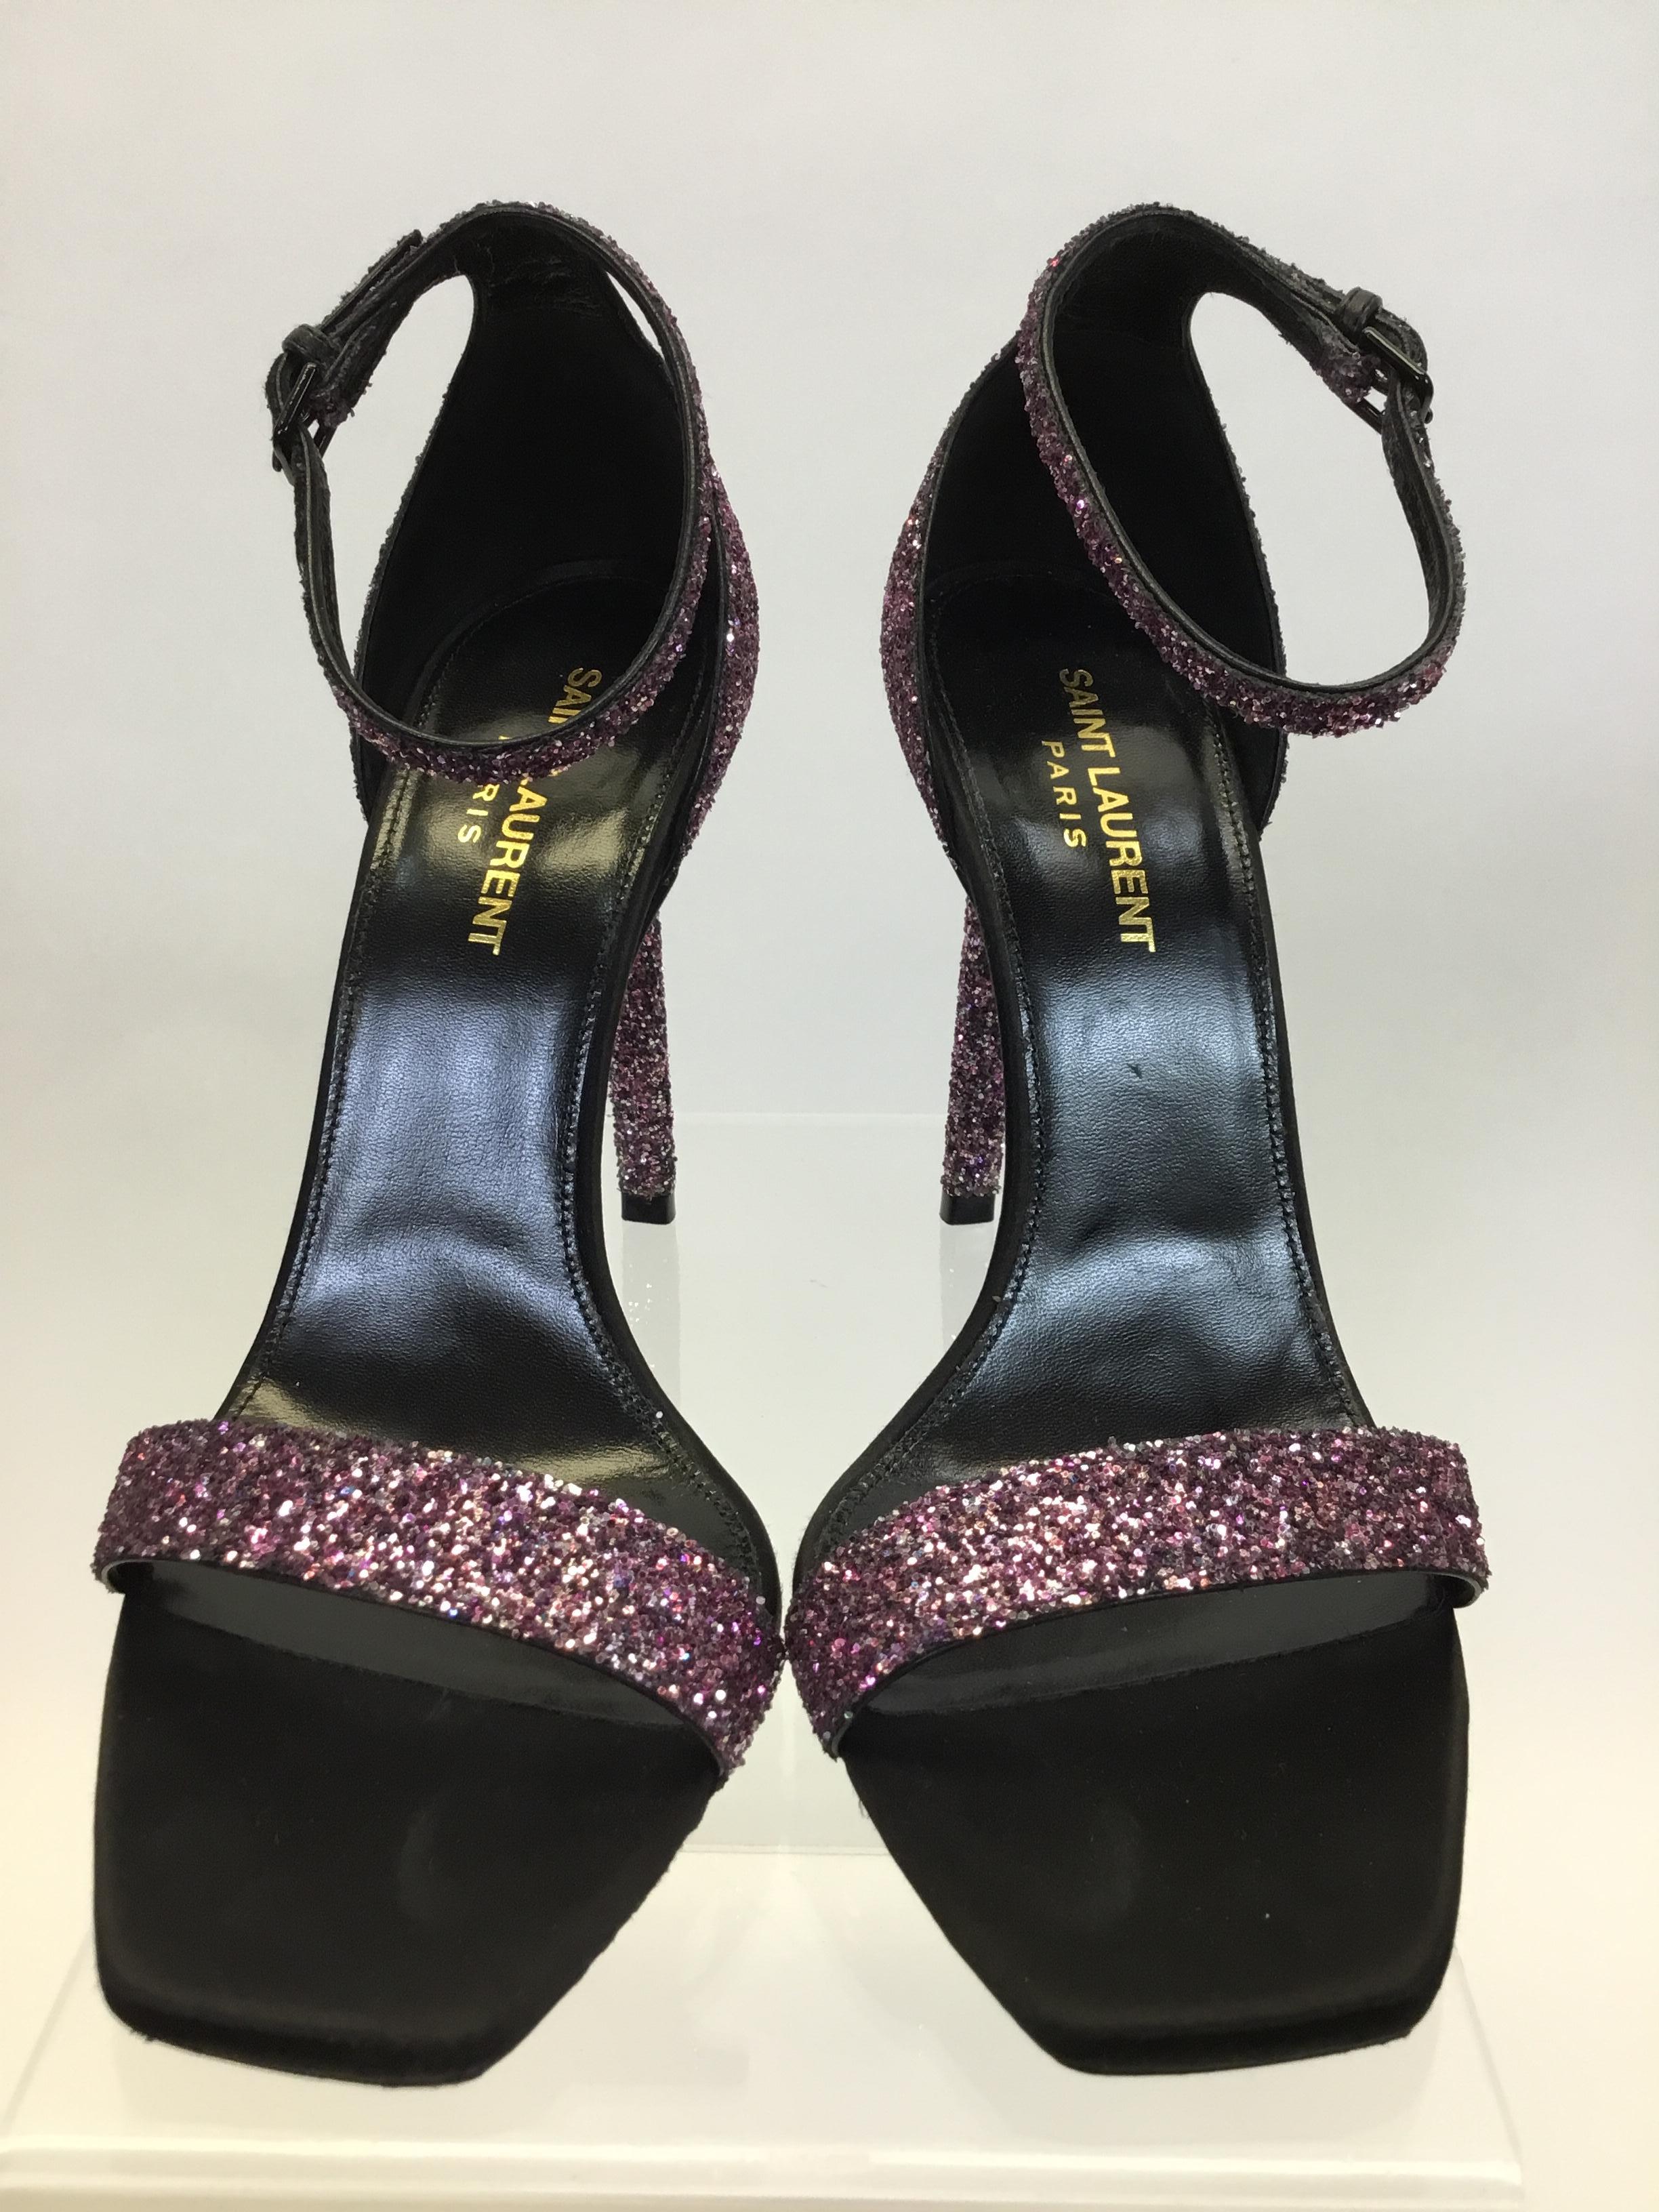 Saint Laurent Pink and Purple Beaded Heel
$399
Made in Italy
Size 38
4.25